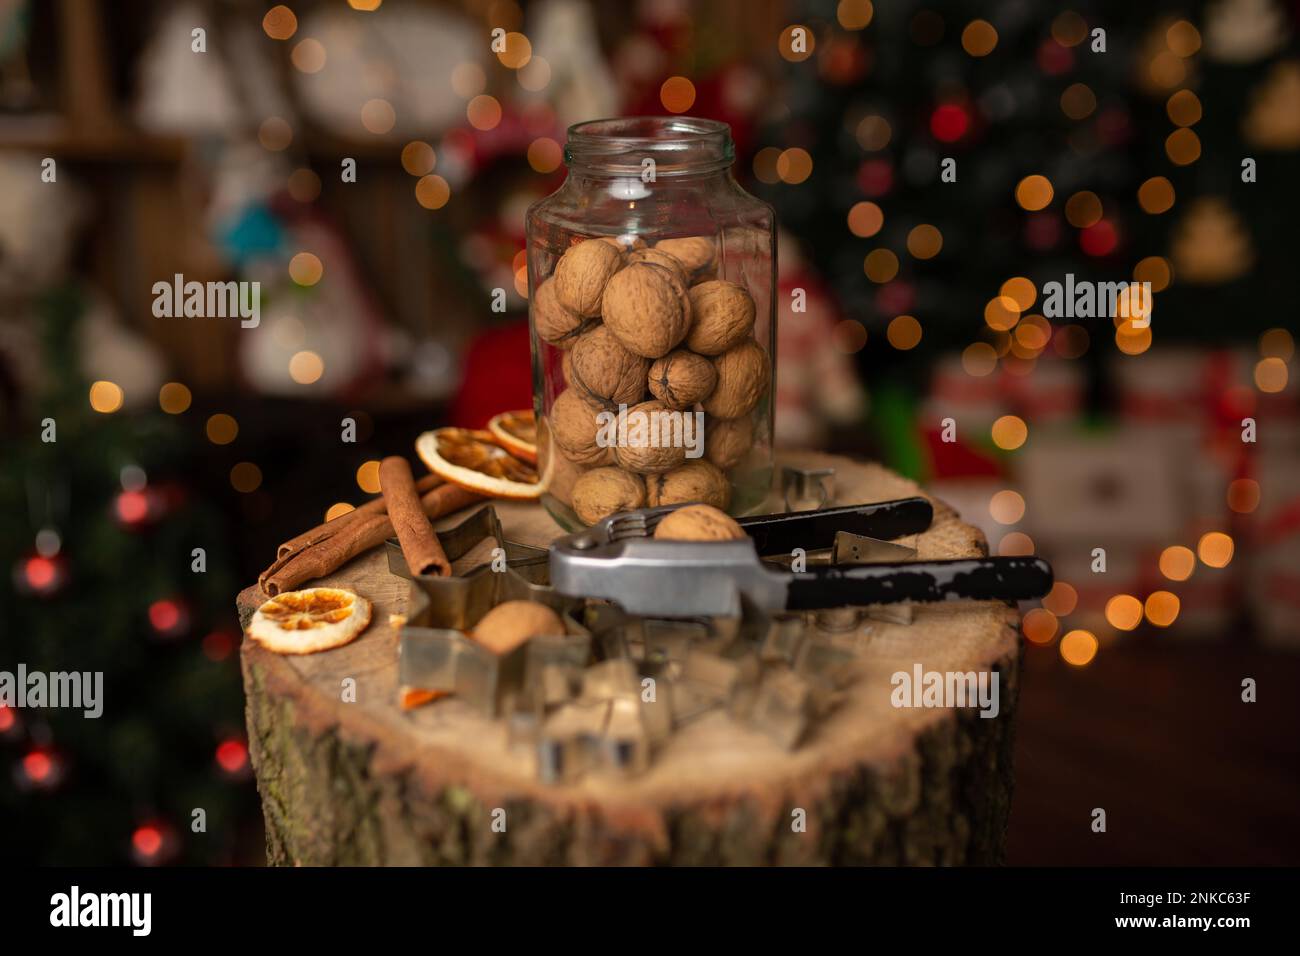 Christmas scene with beautiful walnuts and bokeh in the background. In studio Stock Photo